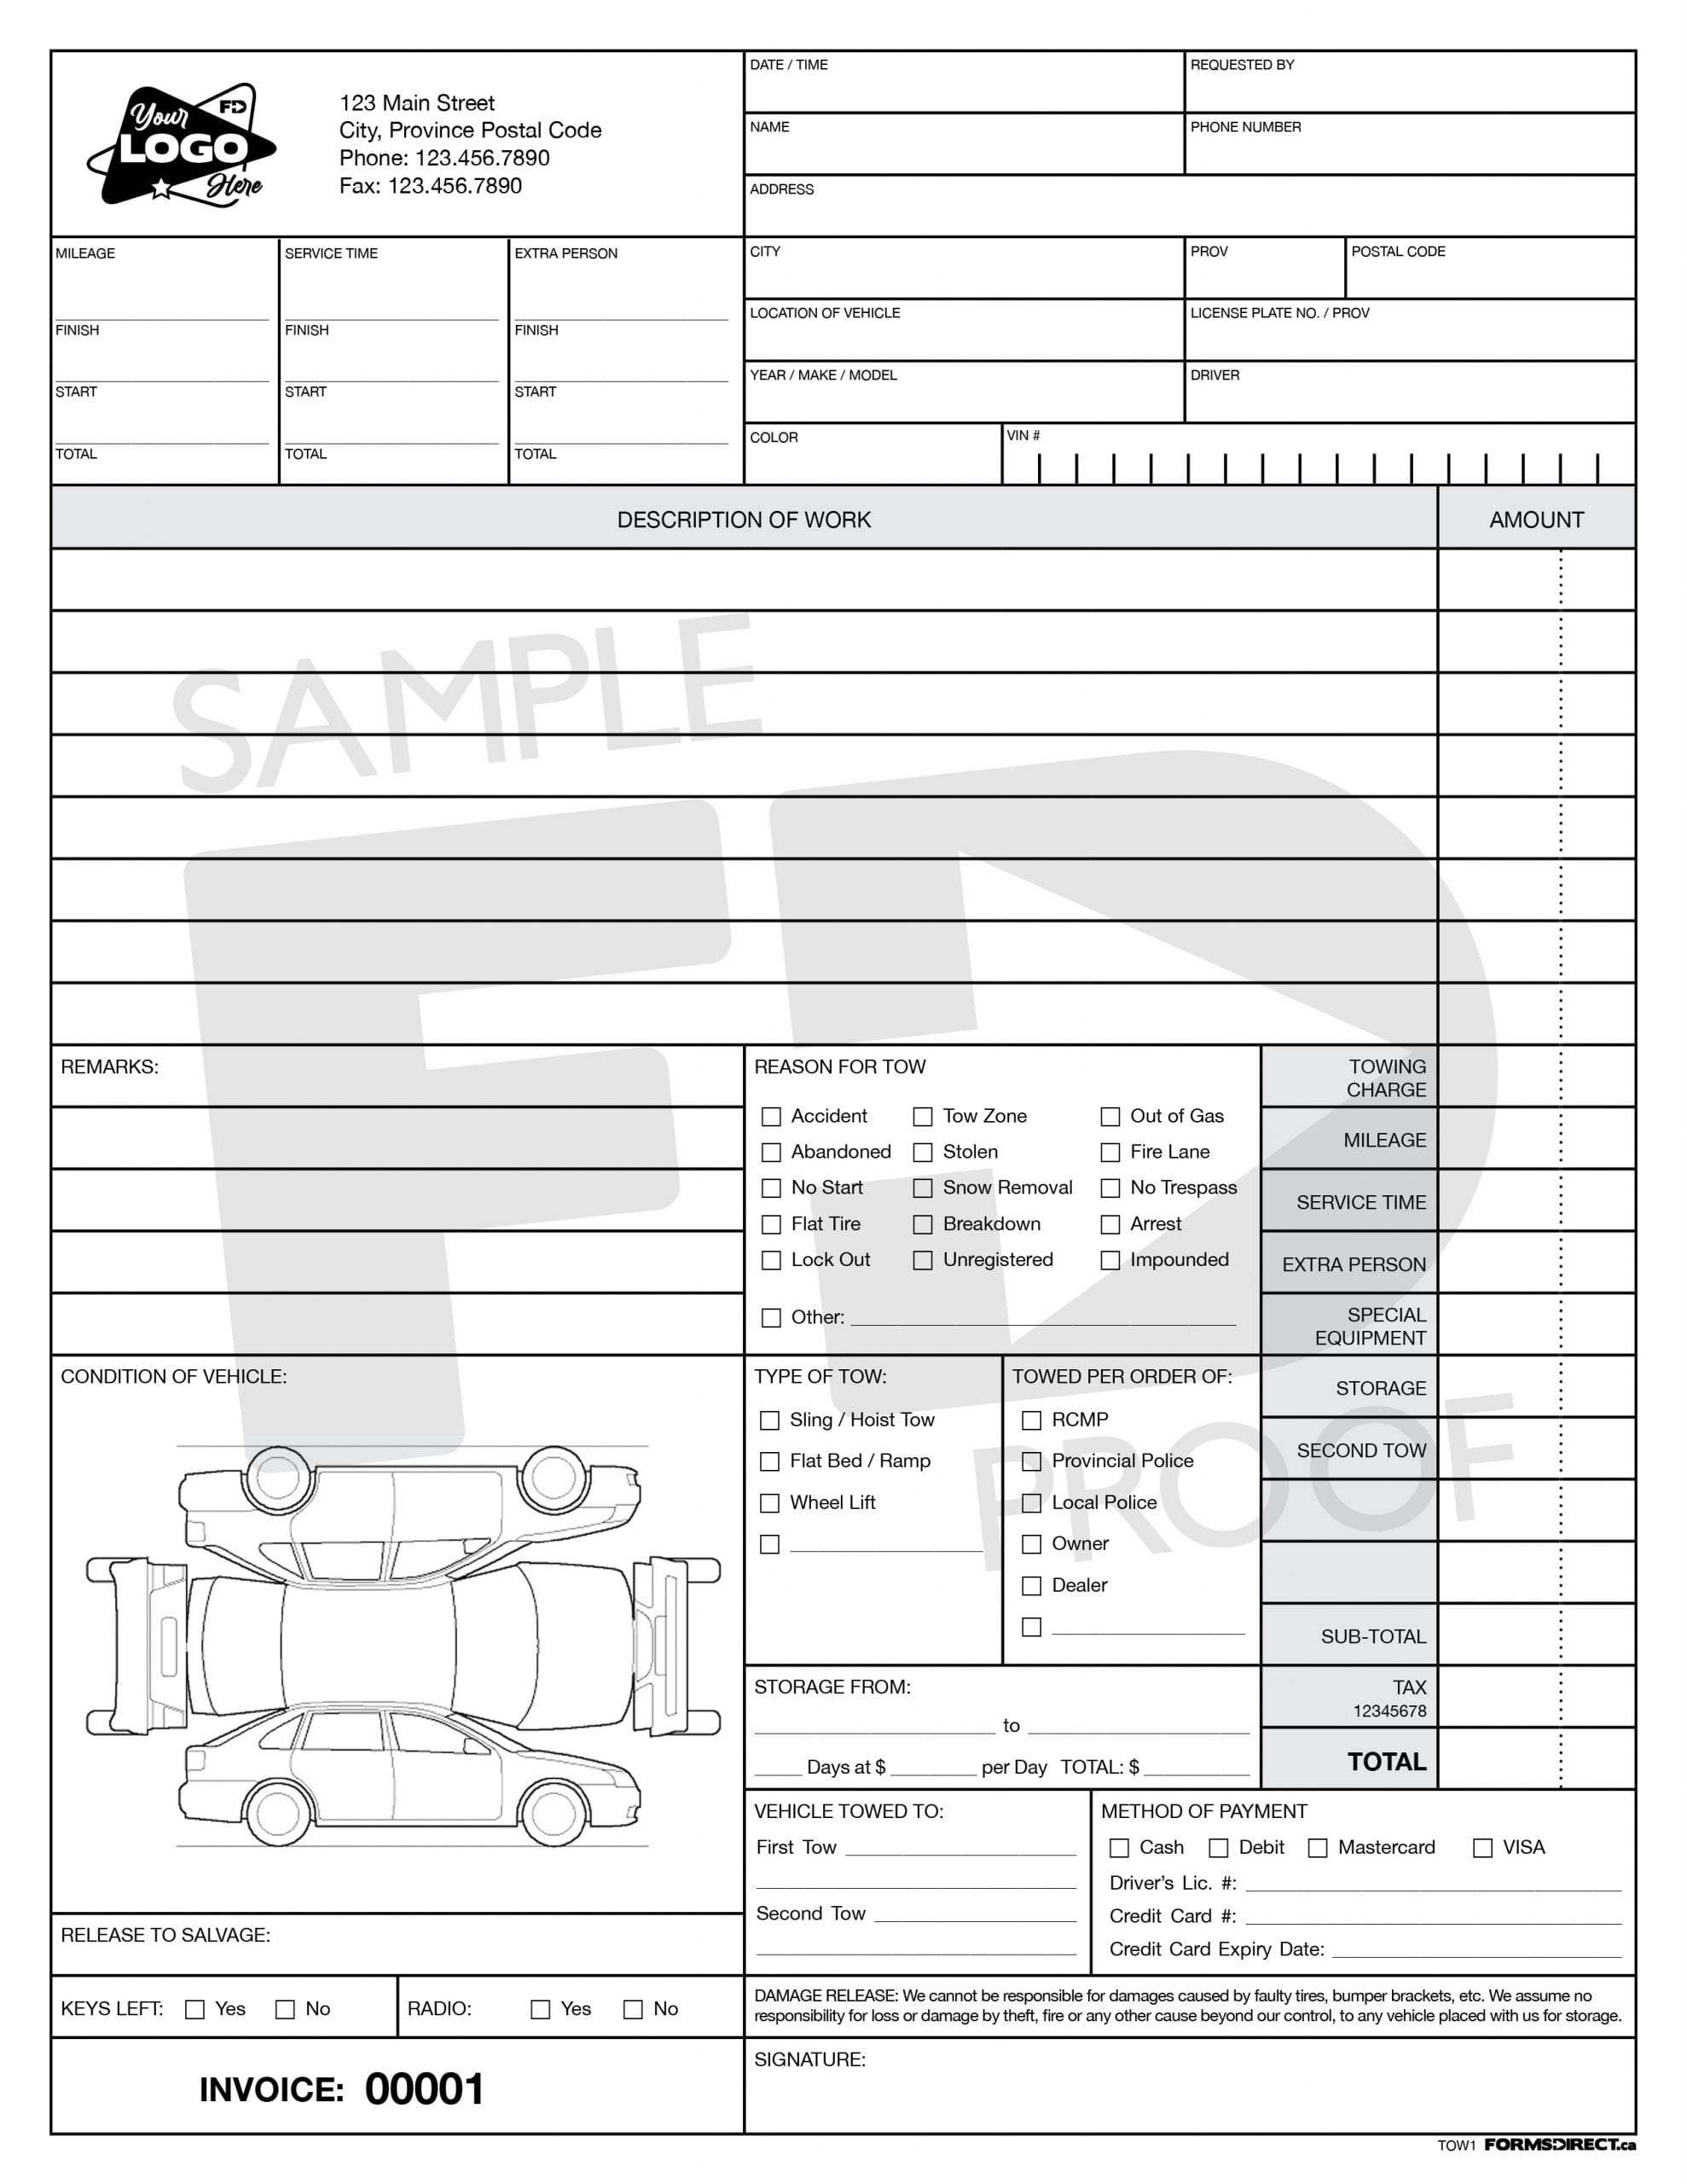 towing-service-invoice-template-13-templates-free-to-use-demplates